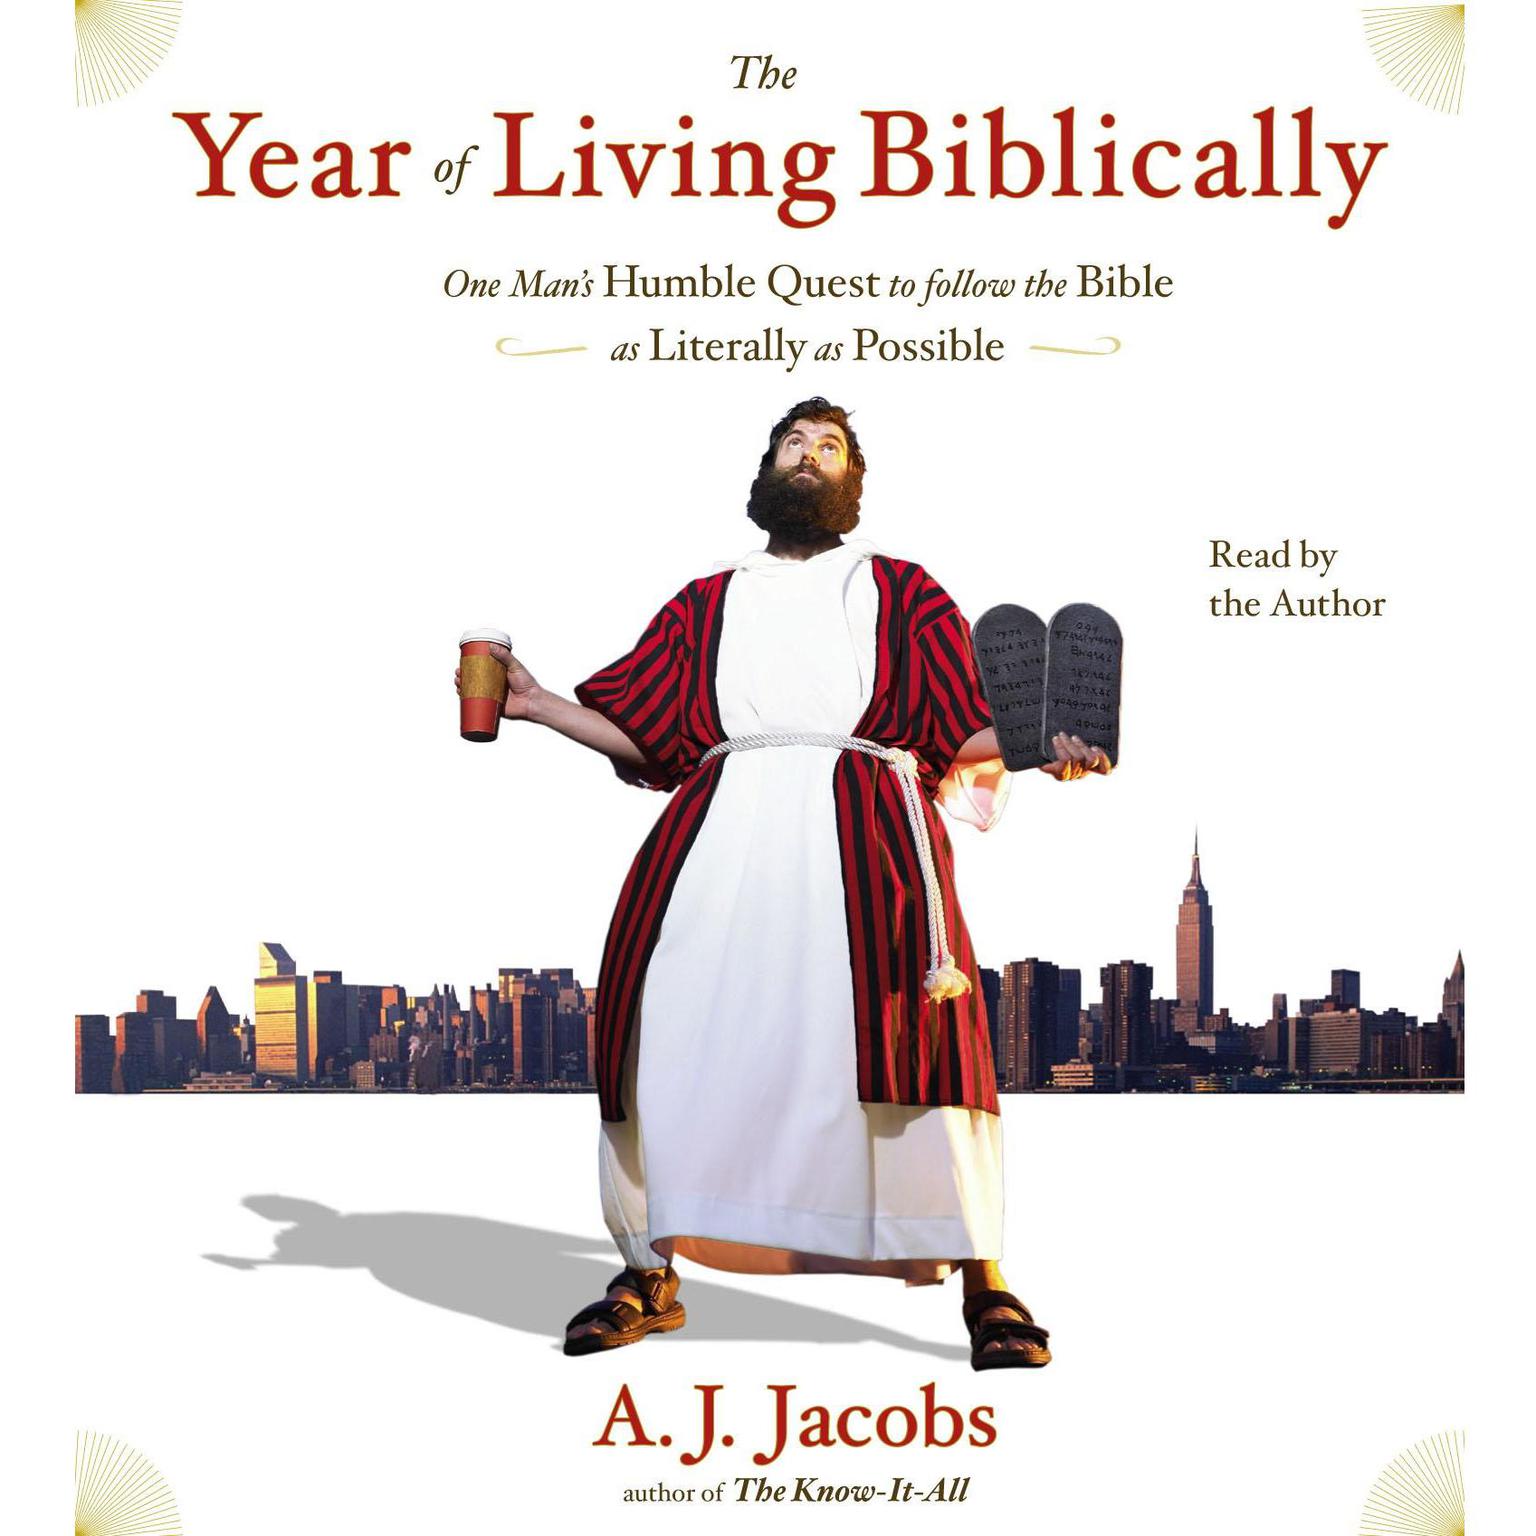 The Year of Living Biblically (Abridged): One Mans Humble Quest to Follow the Bible as Literally as Possible Audiobook, by A. J. Jacobs